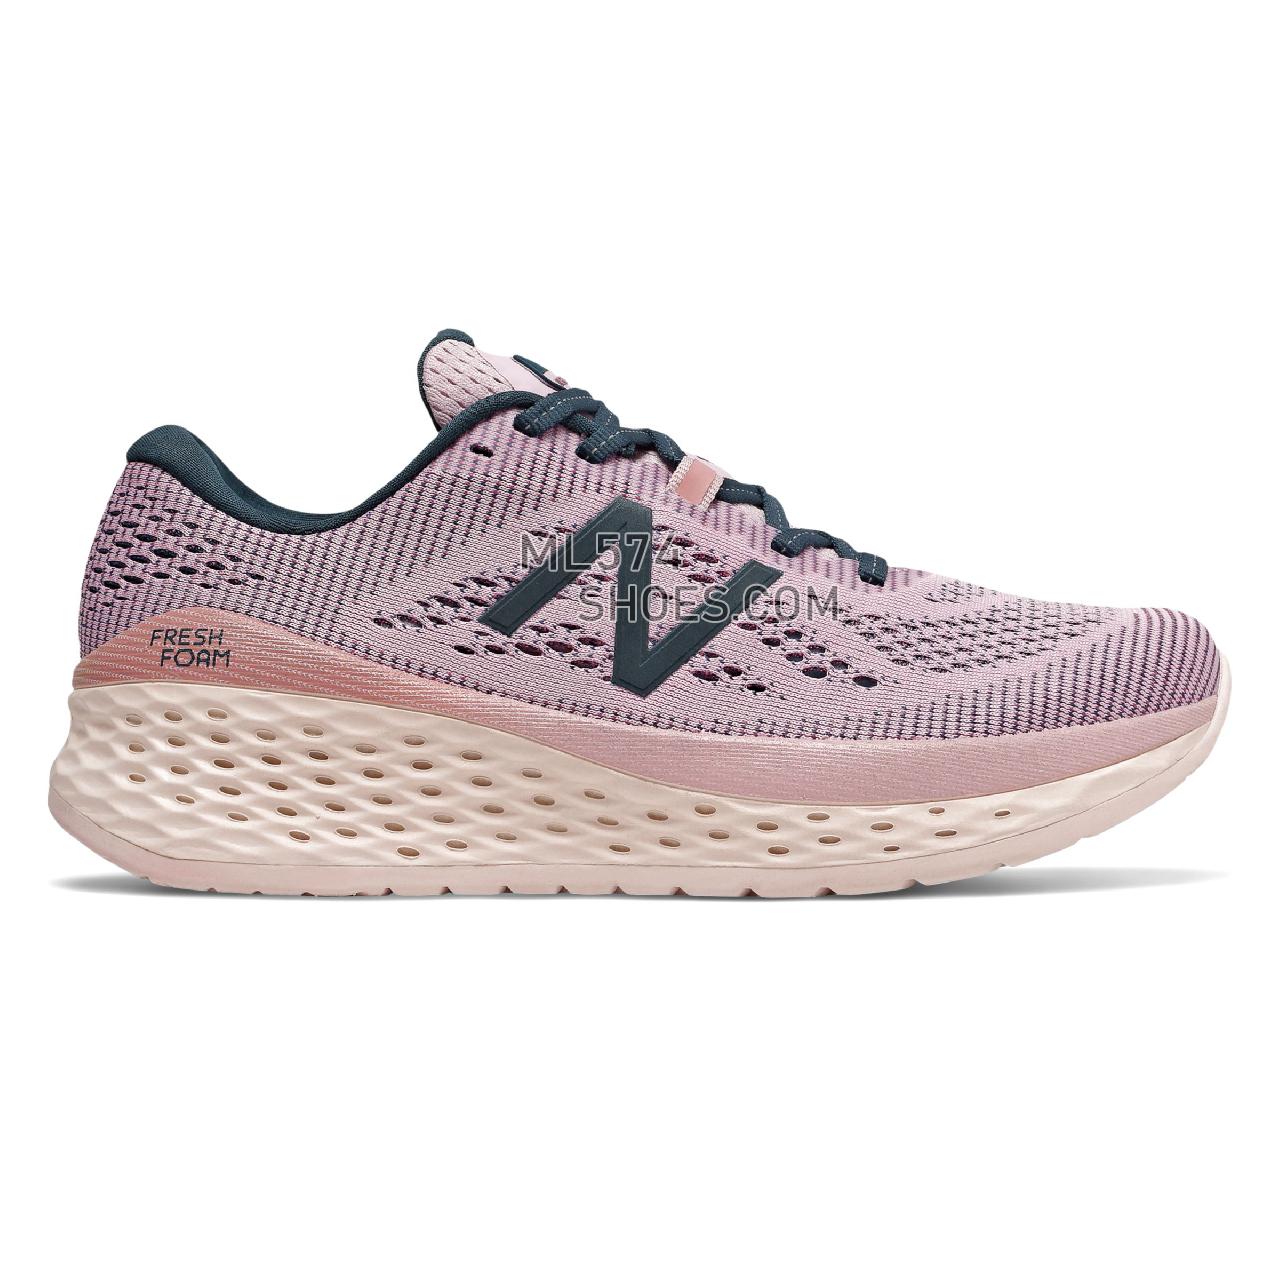 New Balance Fresh Foam More - Women's Neutral Running - Twilight Rose with Supercell and Oxygen Pink - WMORSO